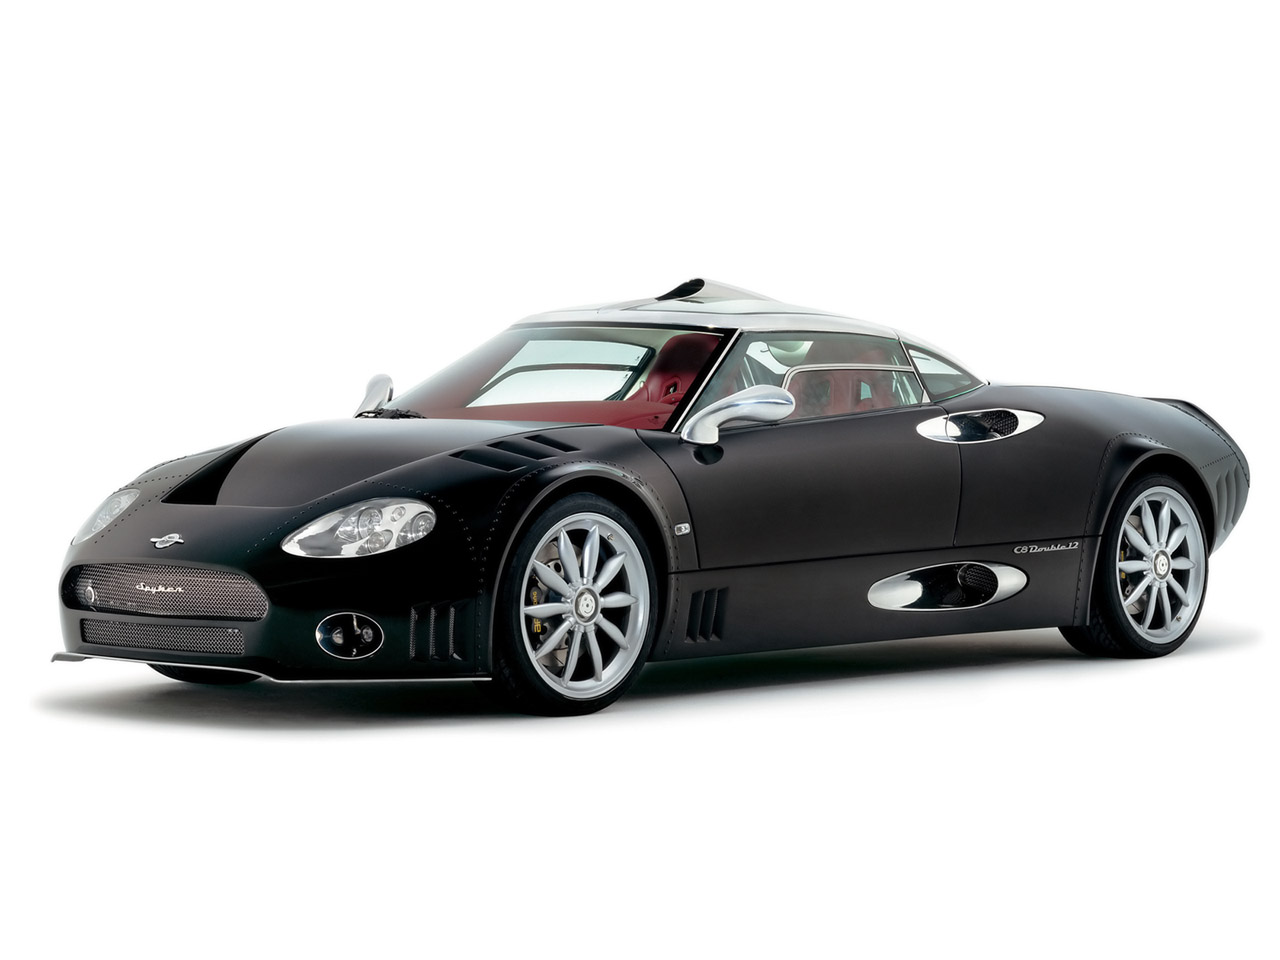 spyker c8 double 12 s-pic. 3